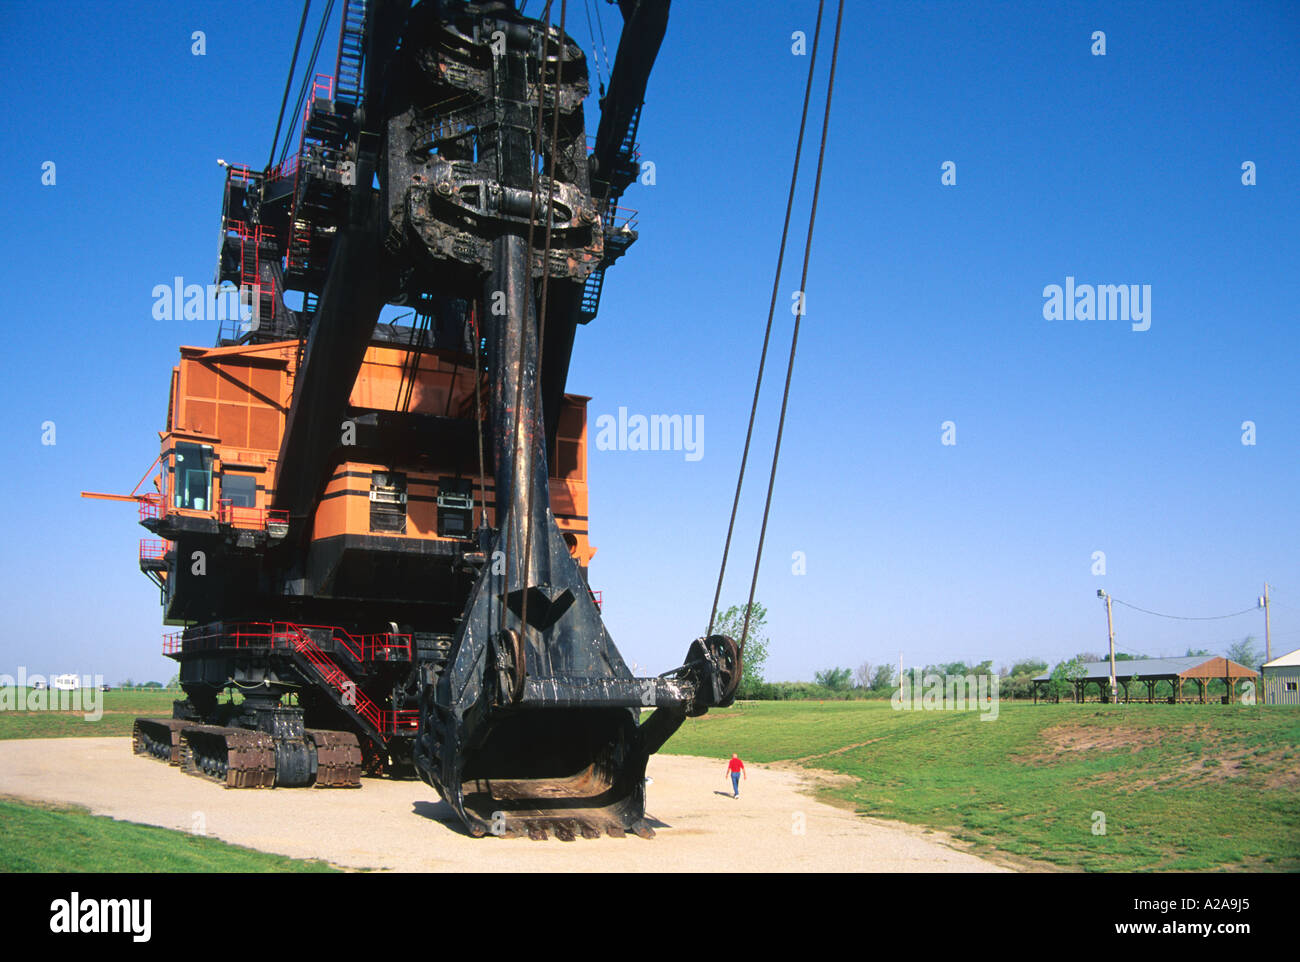 Big Brutus, a huge coal shovel that now serves as a mining museum in Southeastern Kansas. Stock Photo